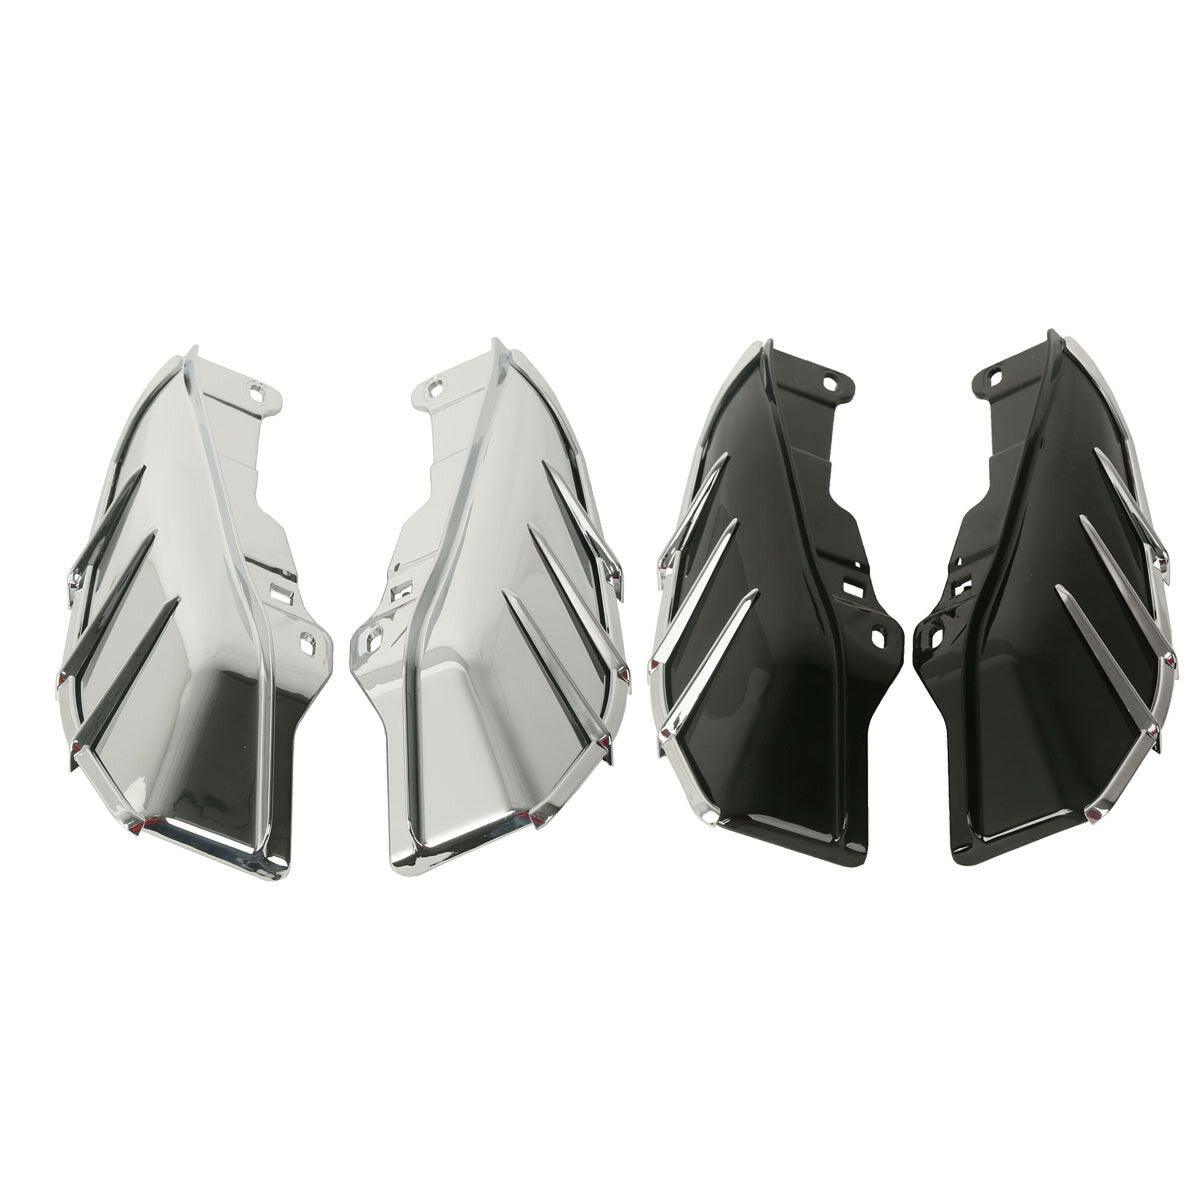 Chrome/Black Mid-Frame Air Deflector Trim Fit For Harley Touring Trike 2009-2016 - Moto Life Products